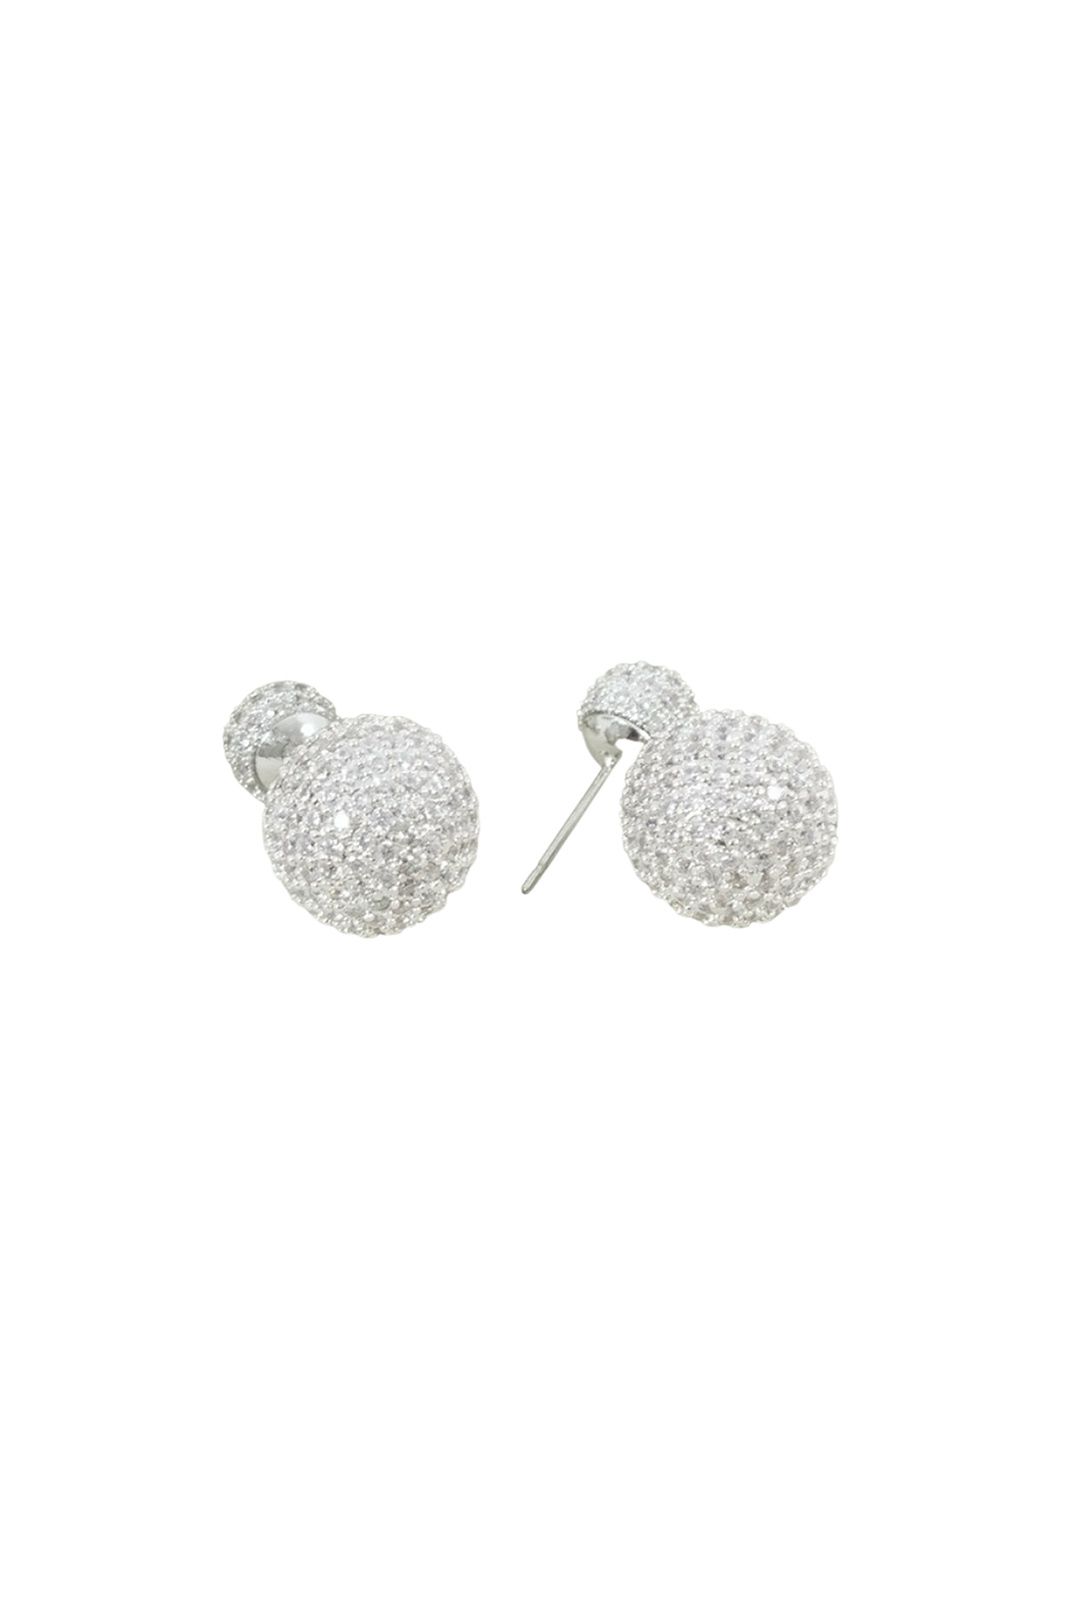 Adorne - Diamante Double Ball Stud Earring - Silver - Front